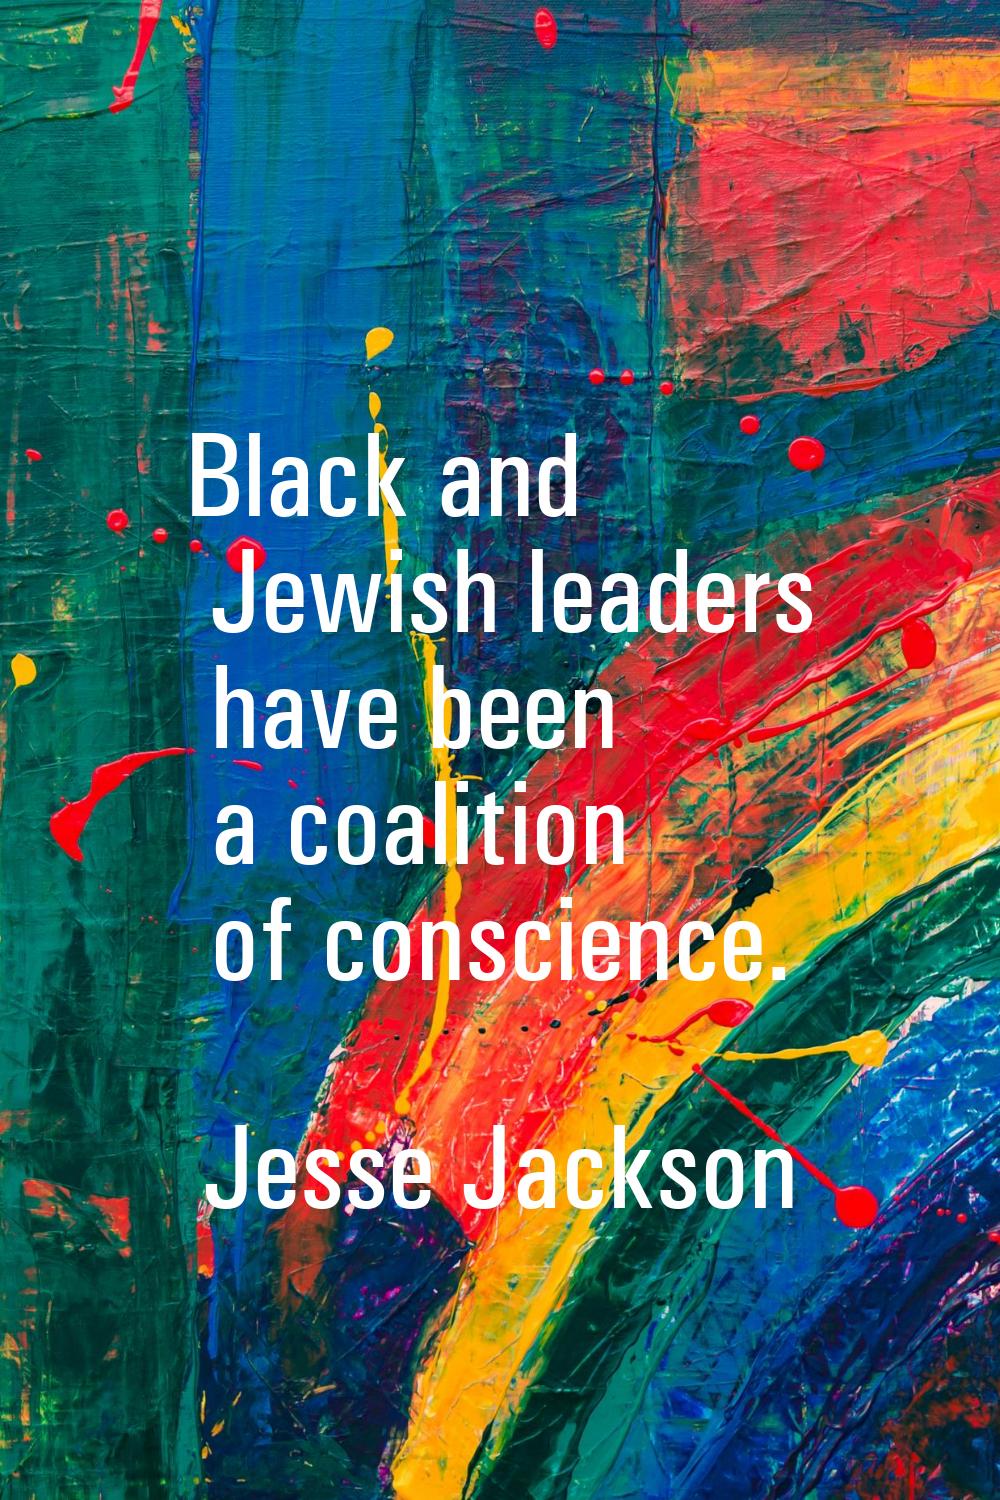 Black and Jewish leaders have been a coalition of conscience.